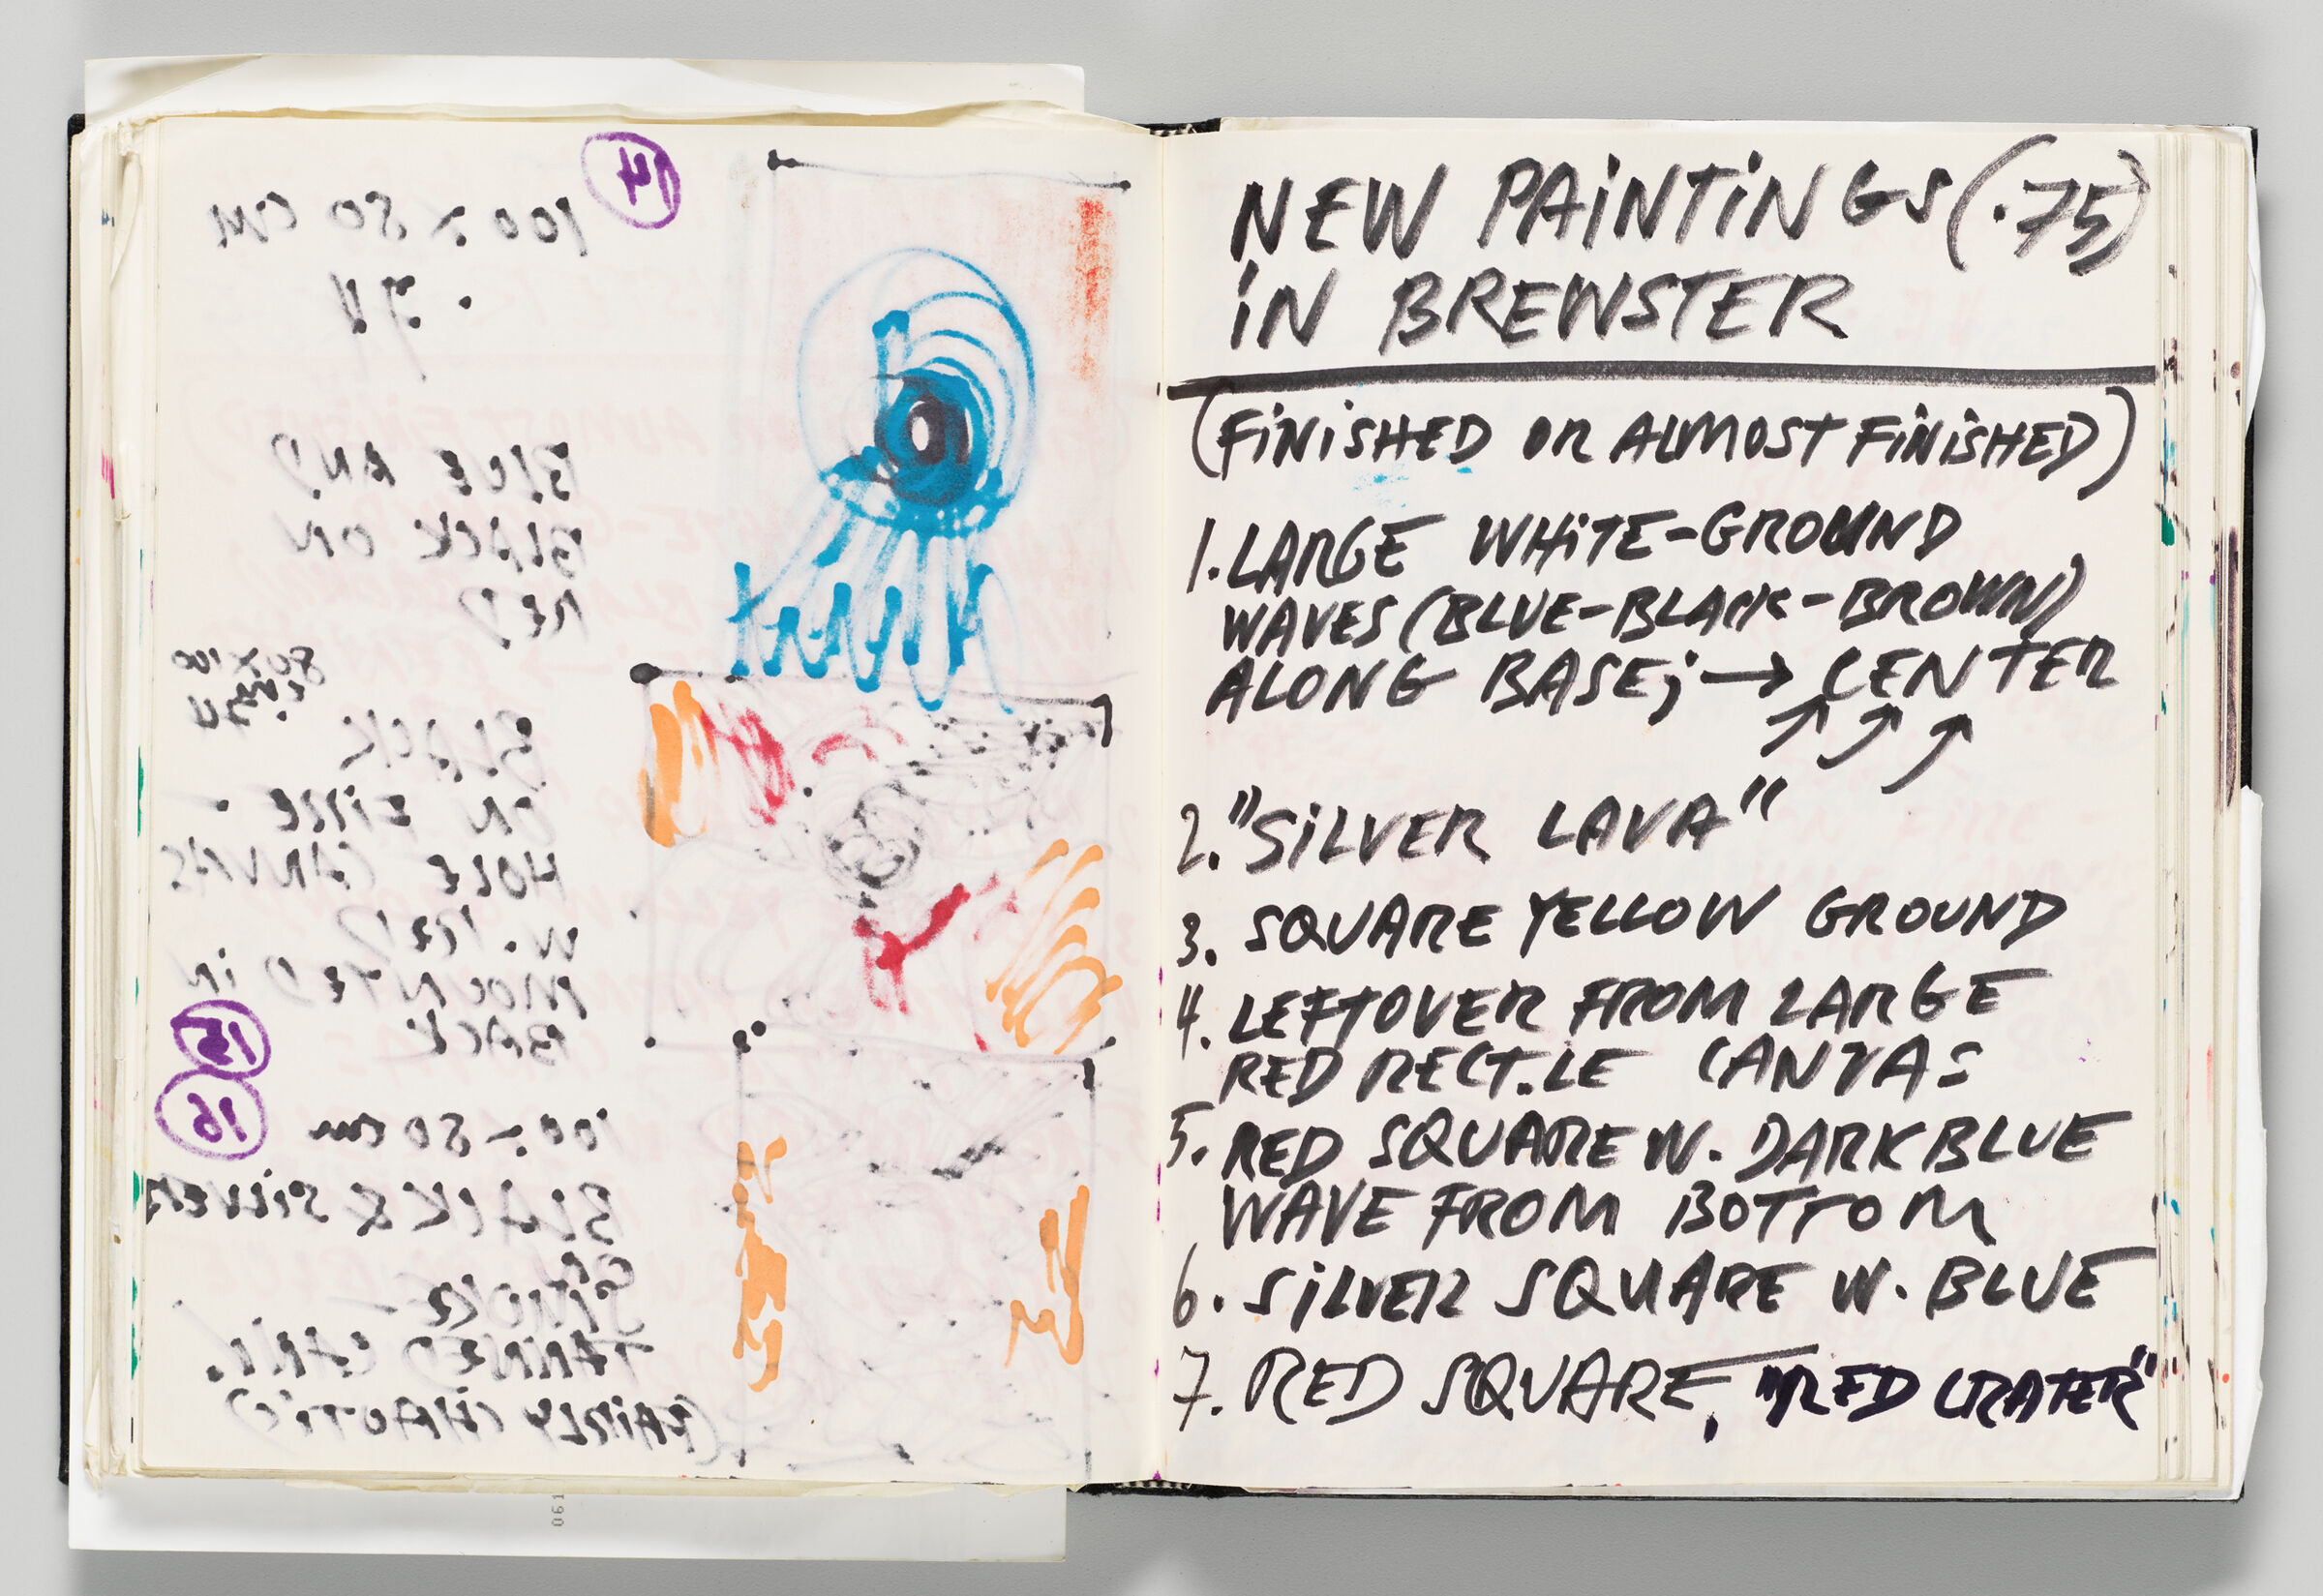 Untitled (Bleed-Through Of Previous Page And Color Transfer, Left Page); Untitled (Sketches And Notes On 